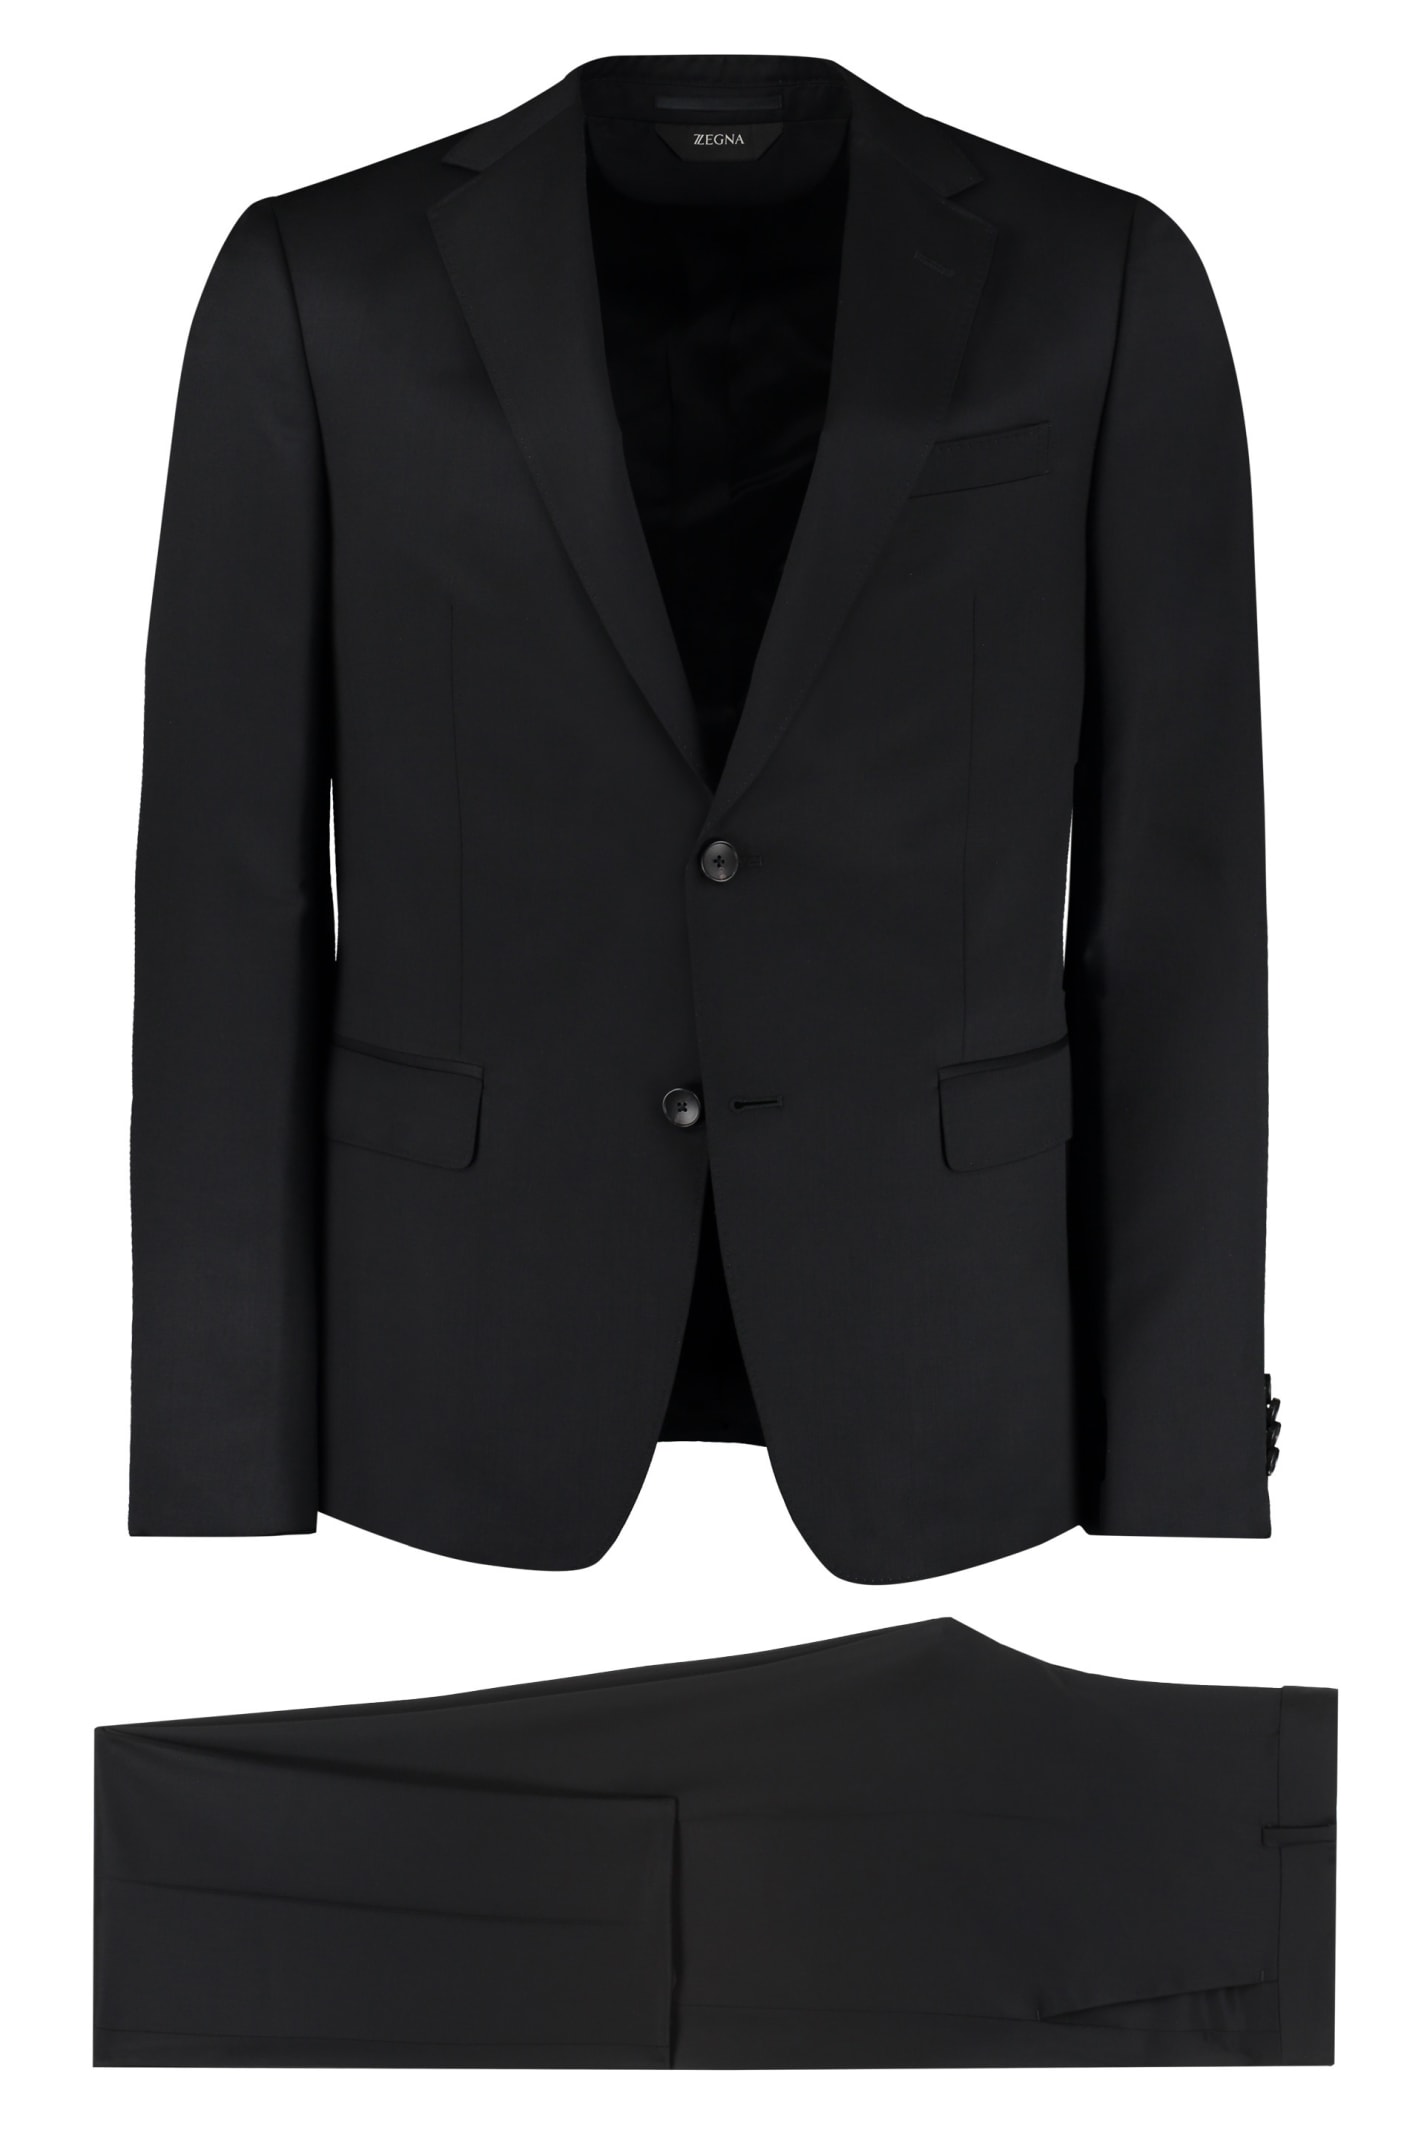 Z Zegna Wool And Mohair Two Piece Suit